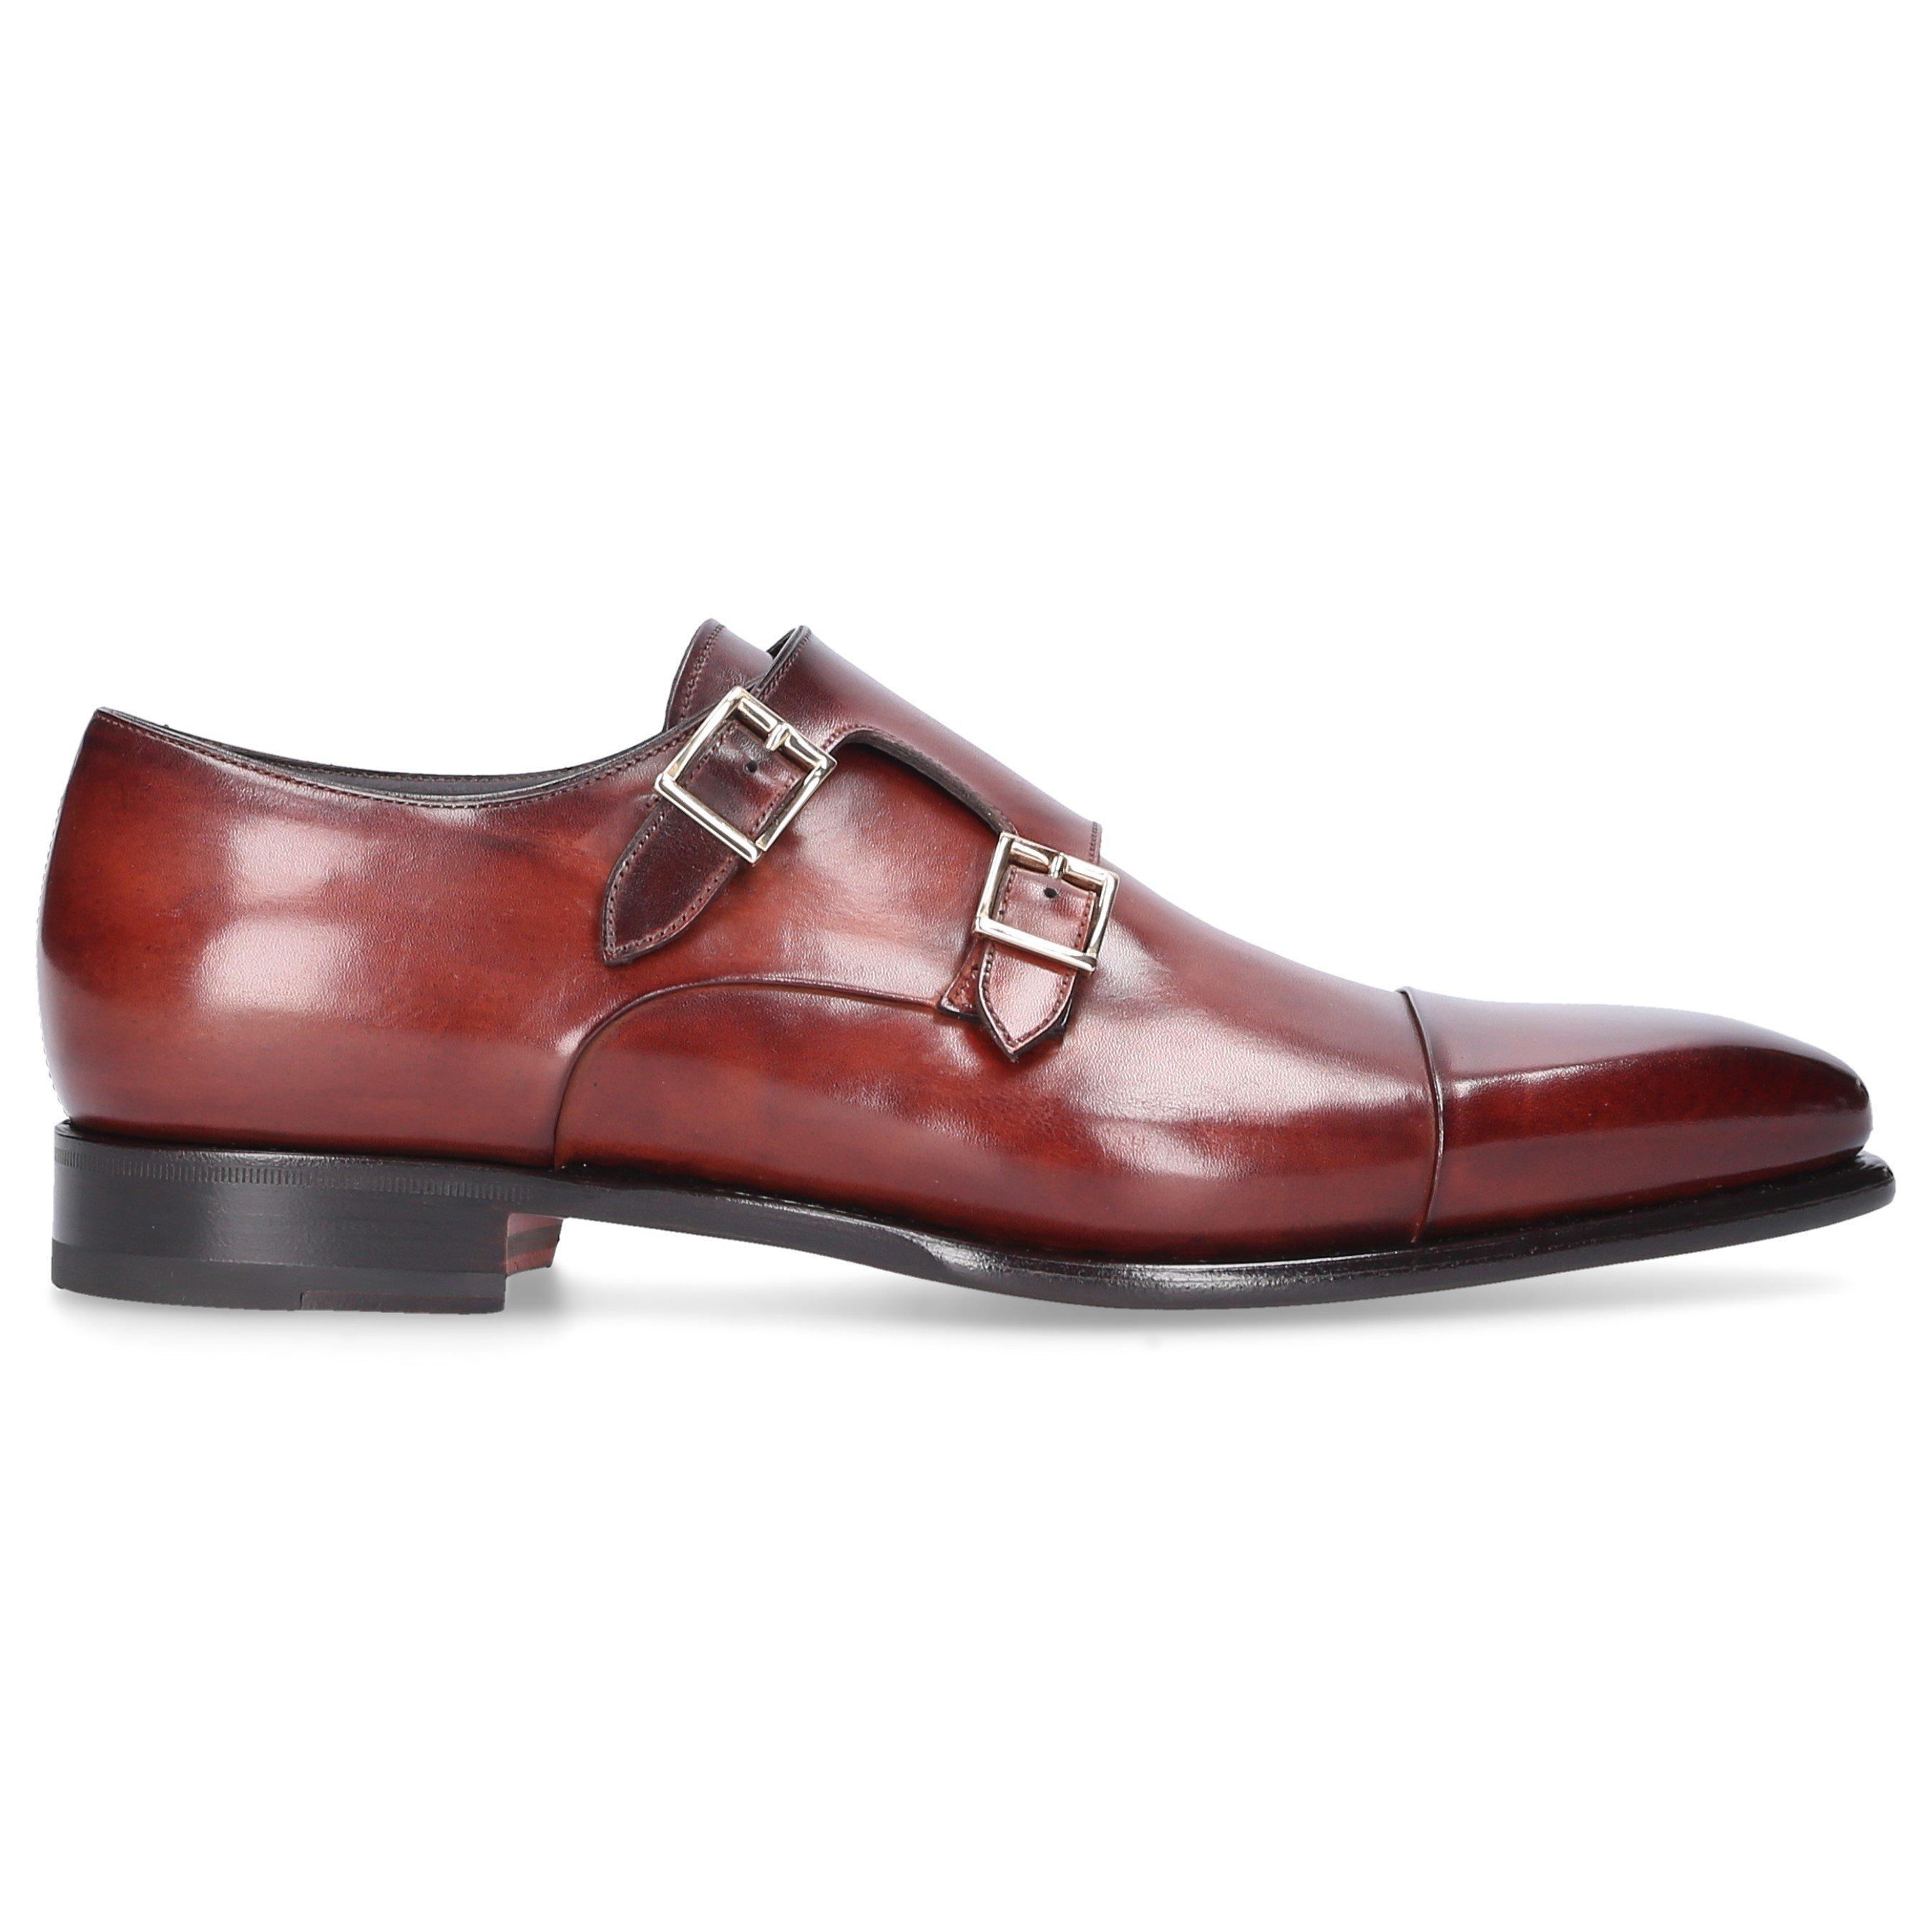 Santoni Leather Monk Shoes 07508 in Red for Men - Lyst